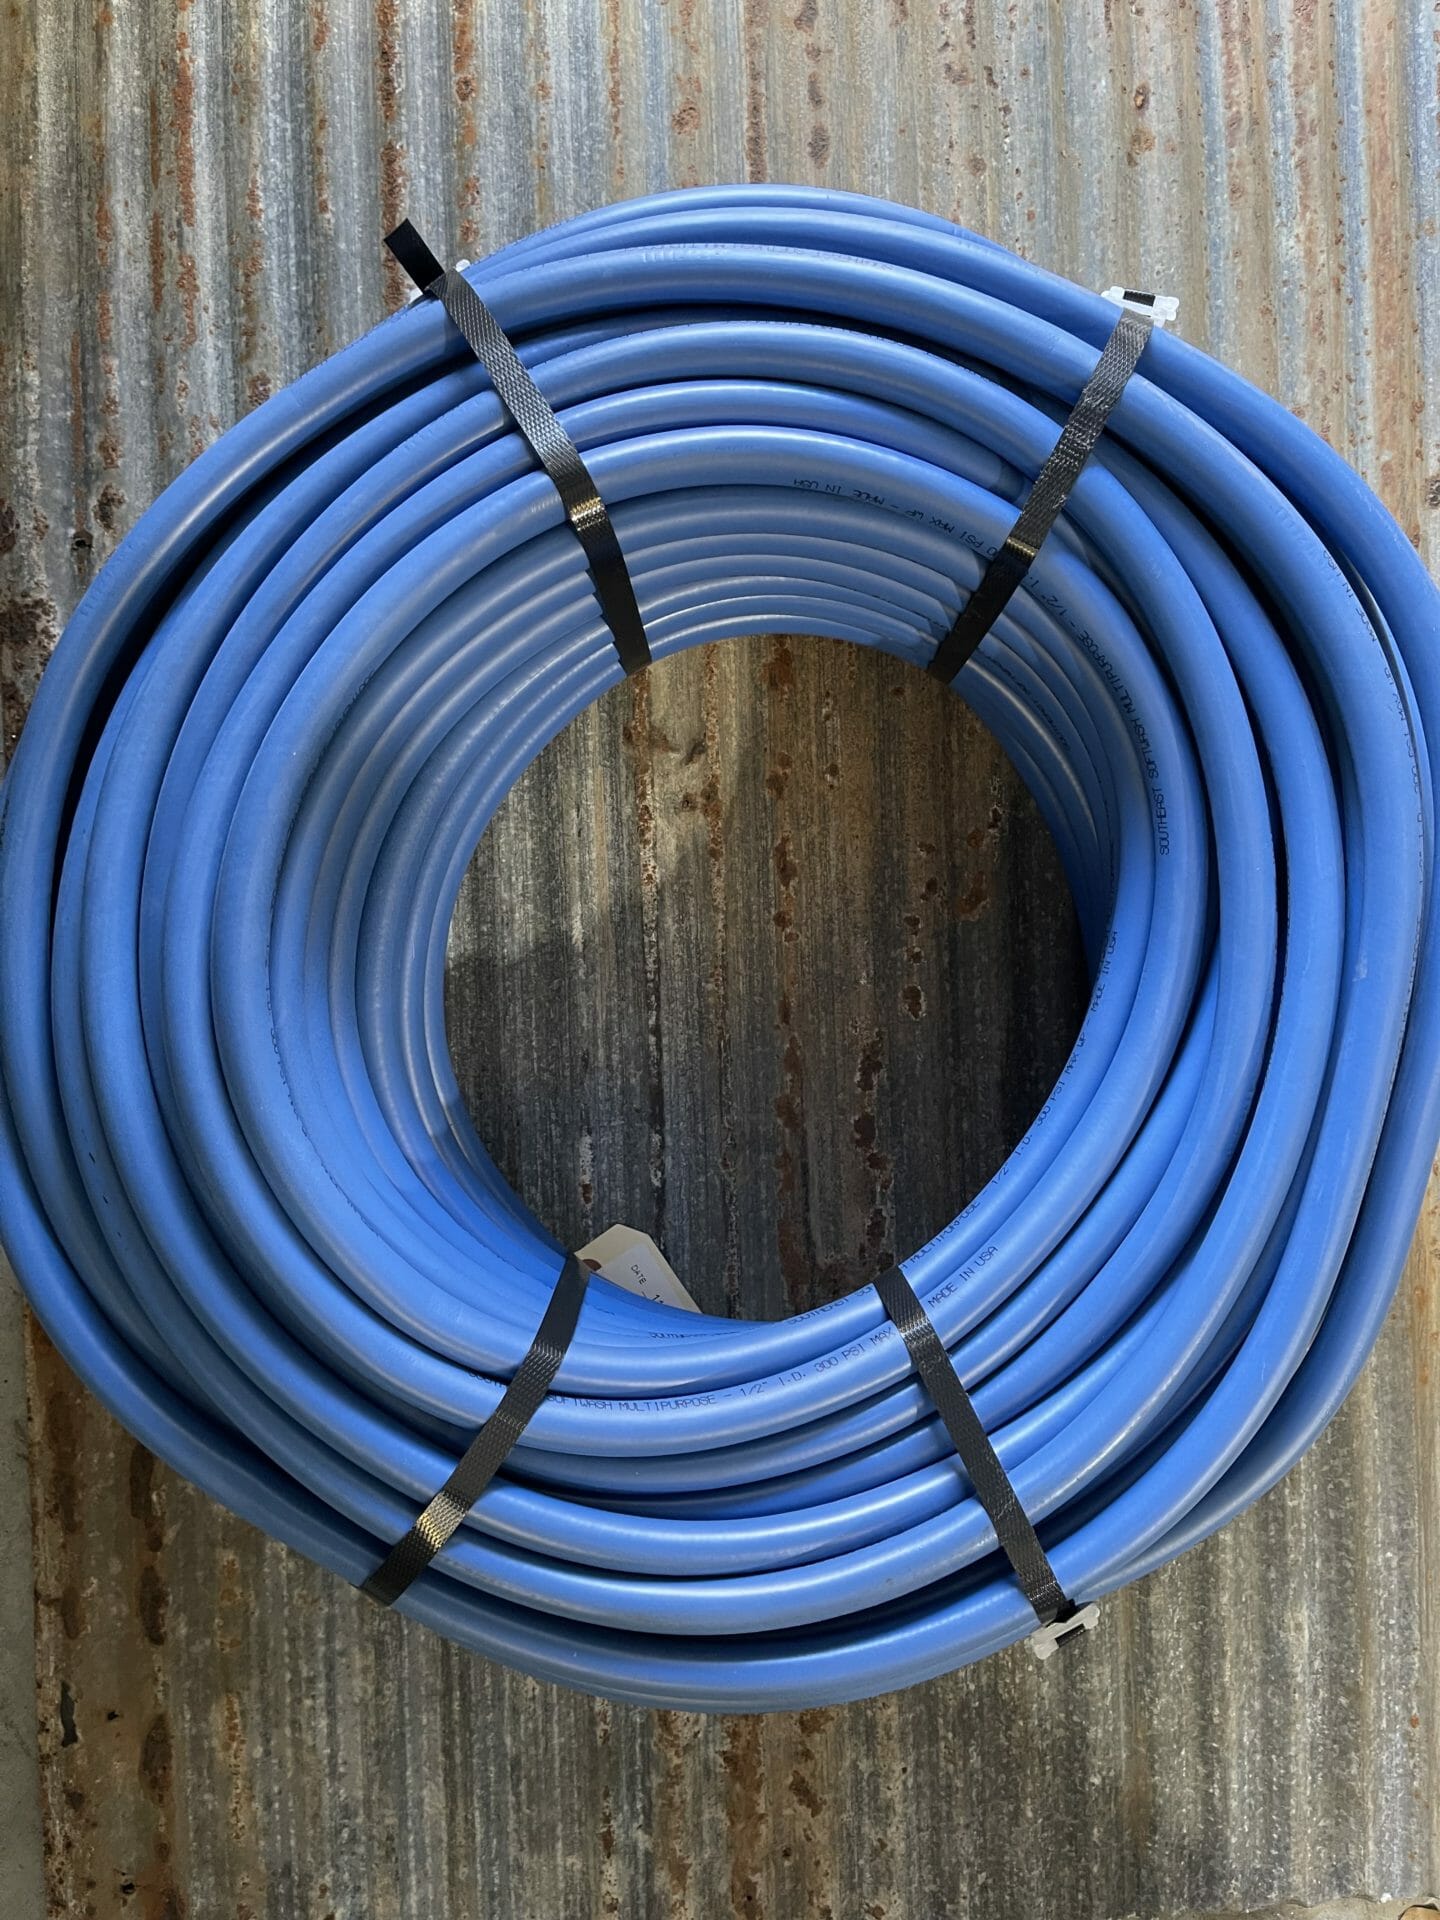 Valley Industries PVC Soft Wash Hose, 1/2in. x 200ft., Model# 33-103321- 200FT